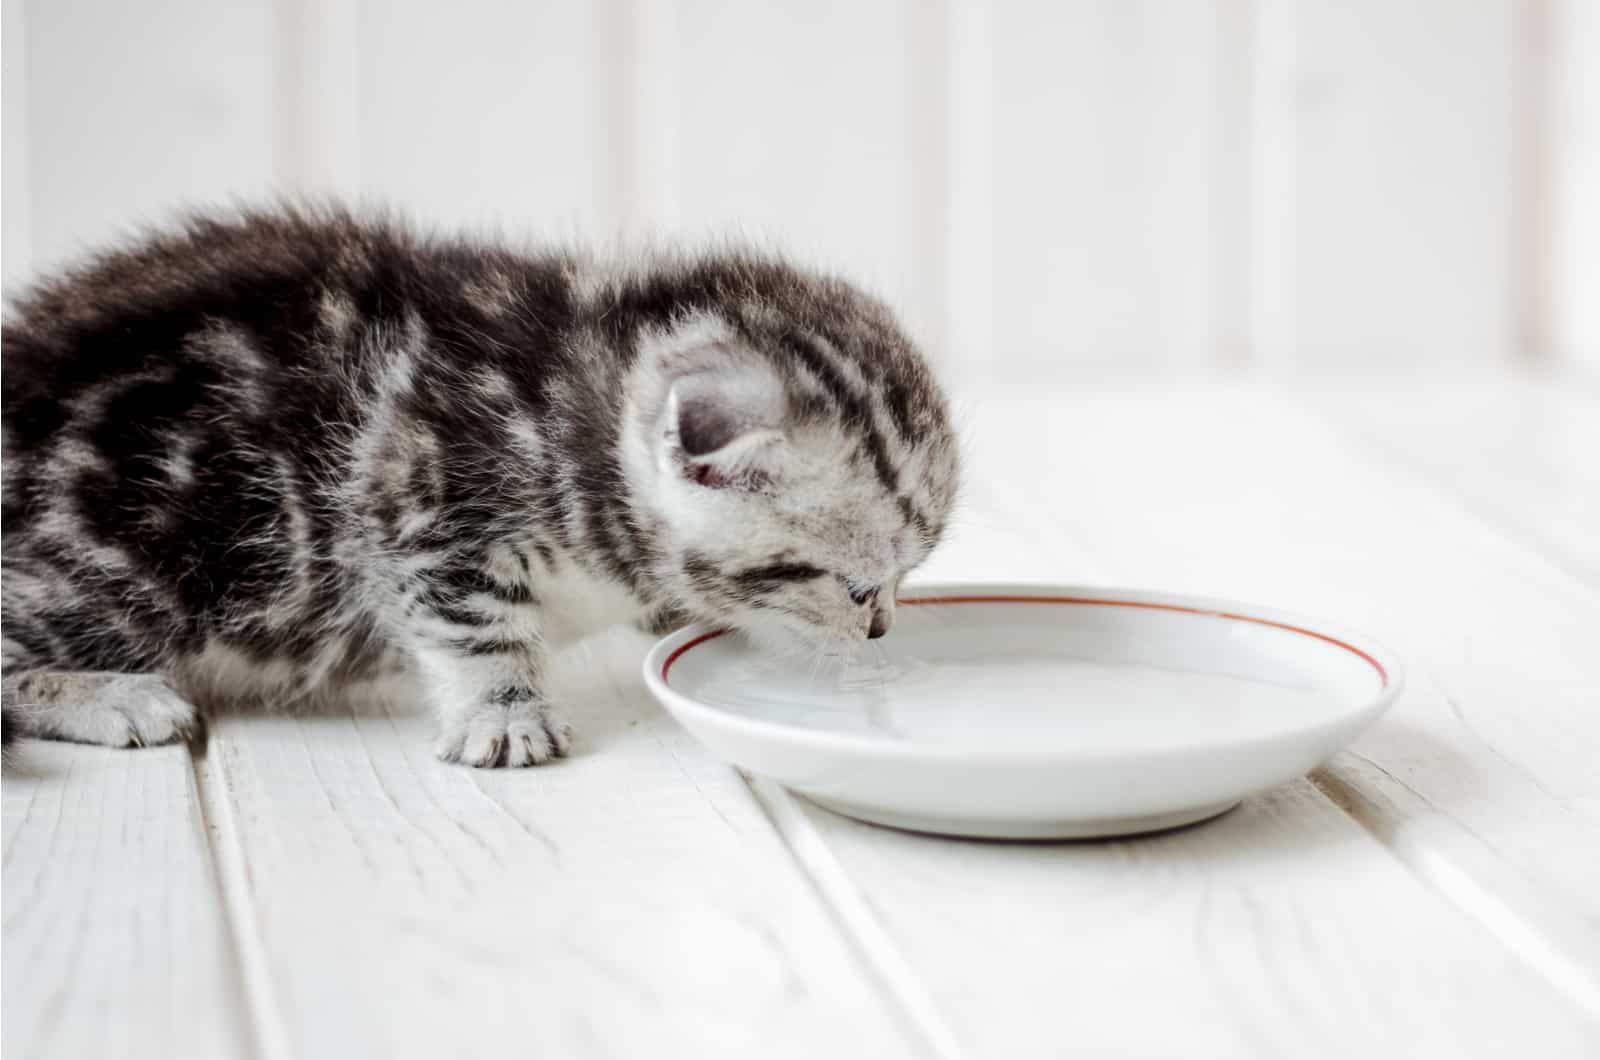 small kitten drinking water from a bowl